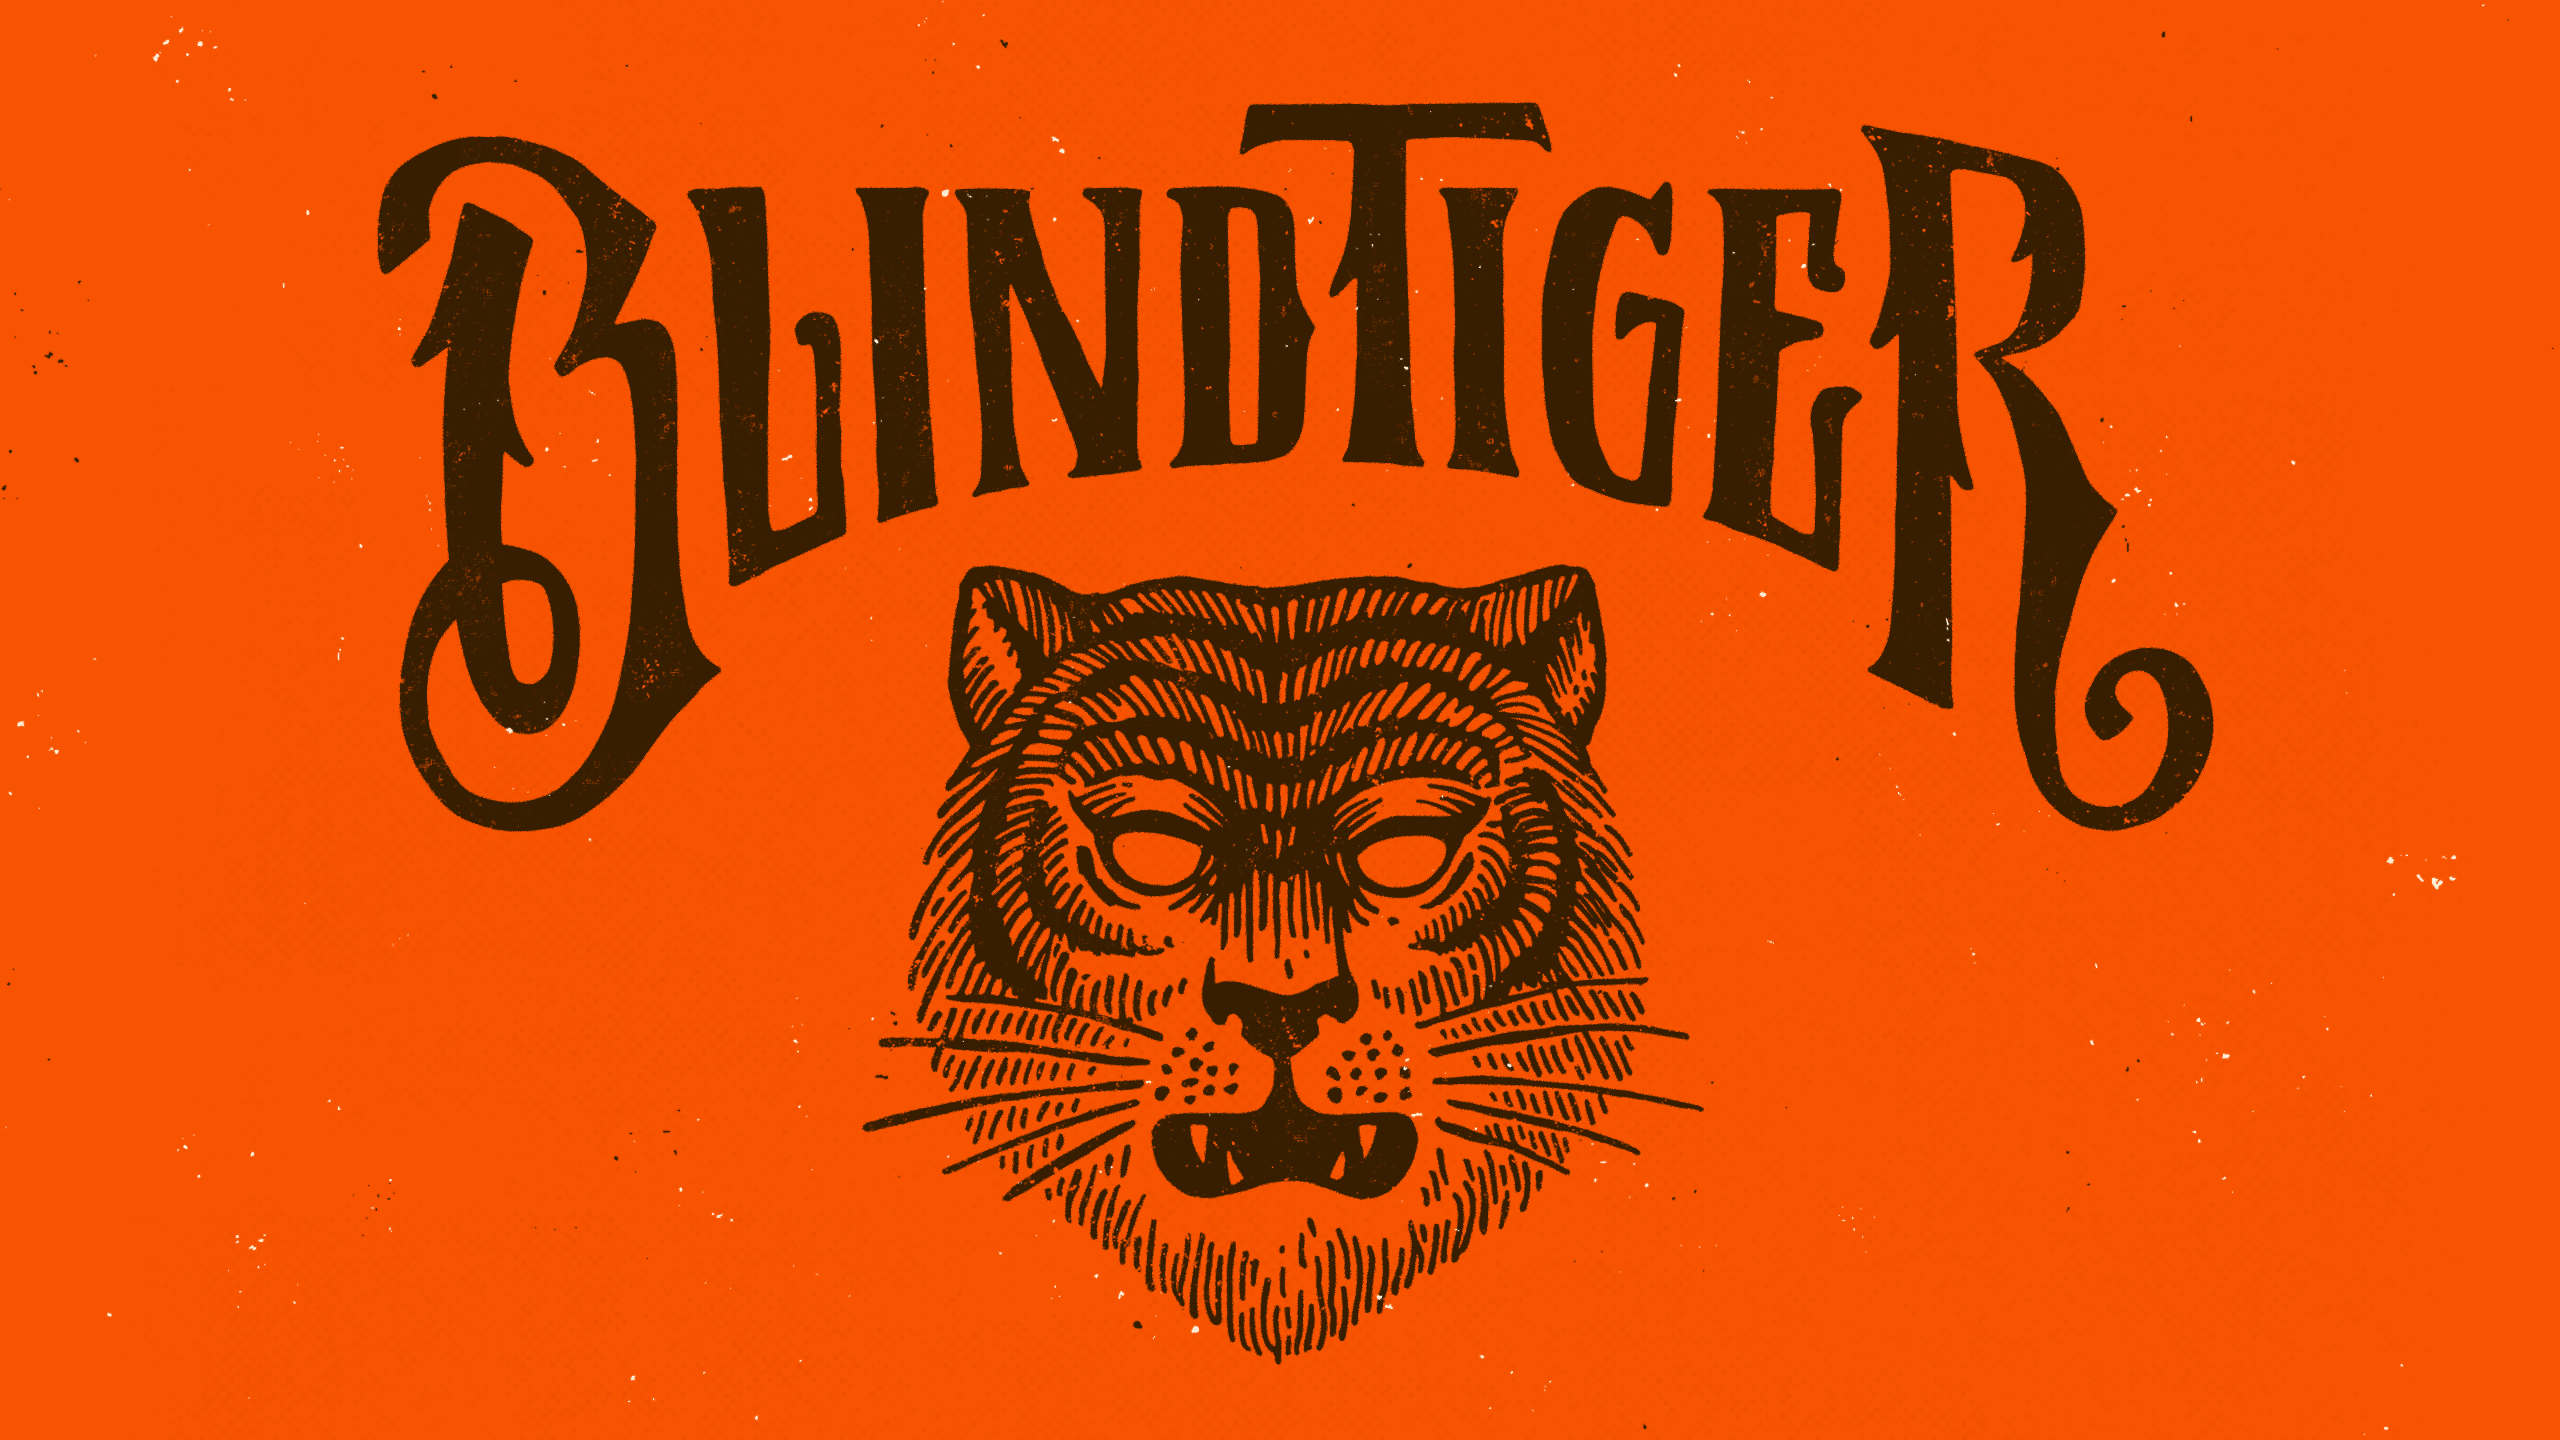 Type paired with tiger illustration